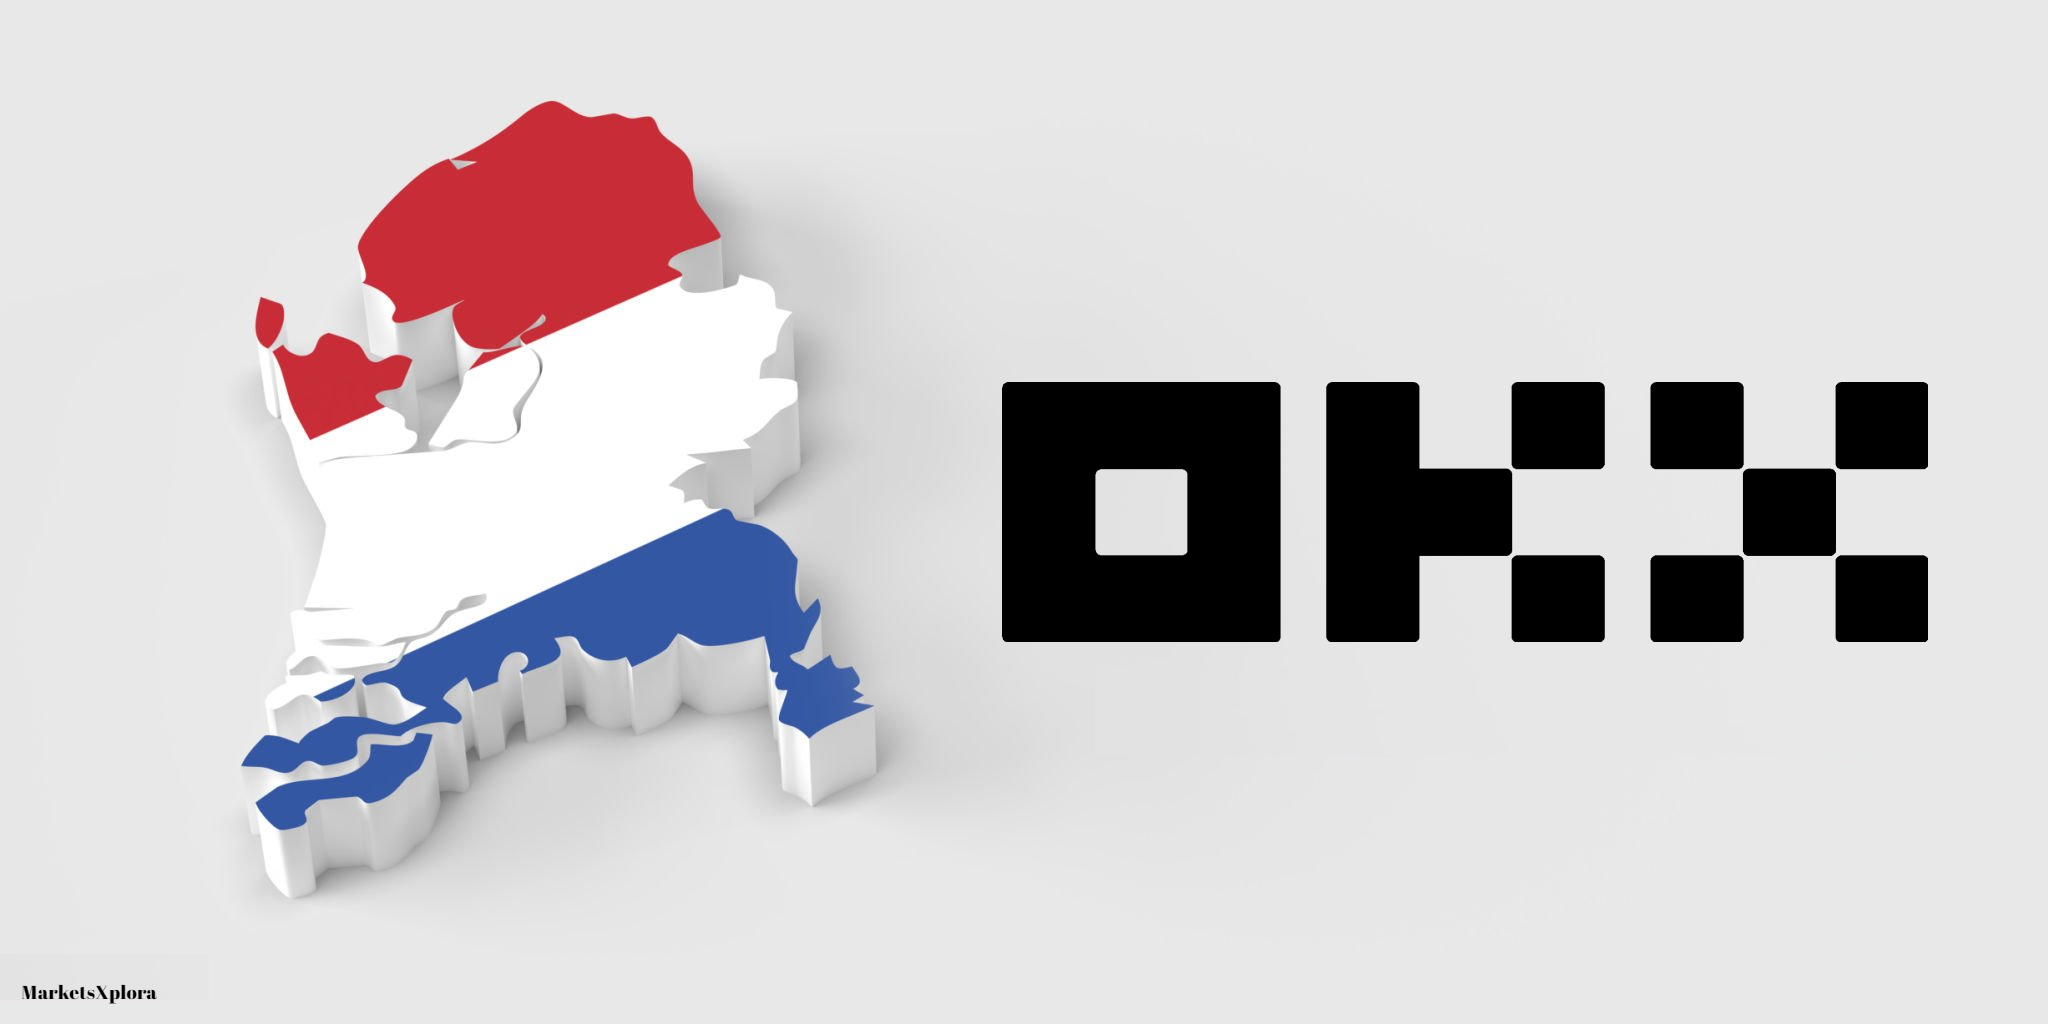 OKX launches services in the Netherlands, offering spot trading, conversion, and wallet services for over 150 digital assets.